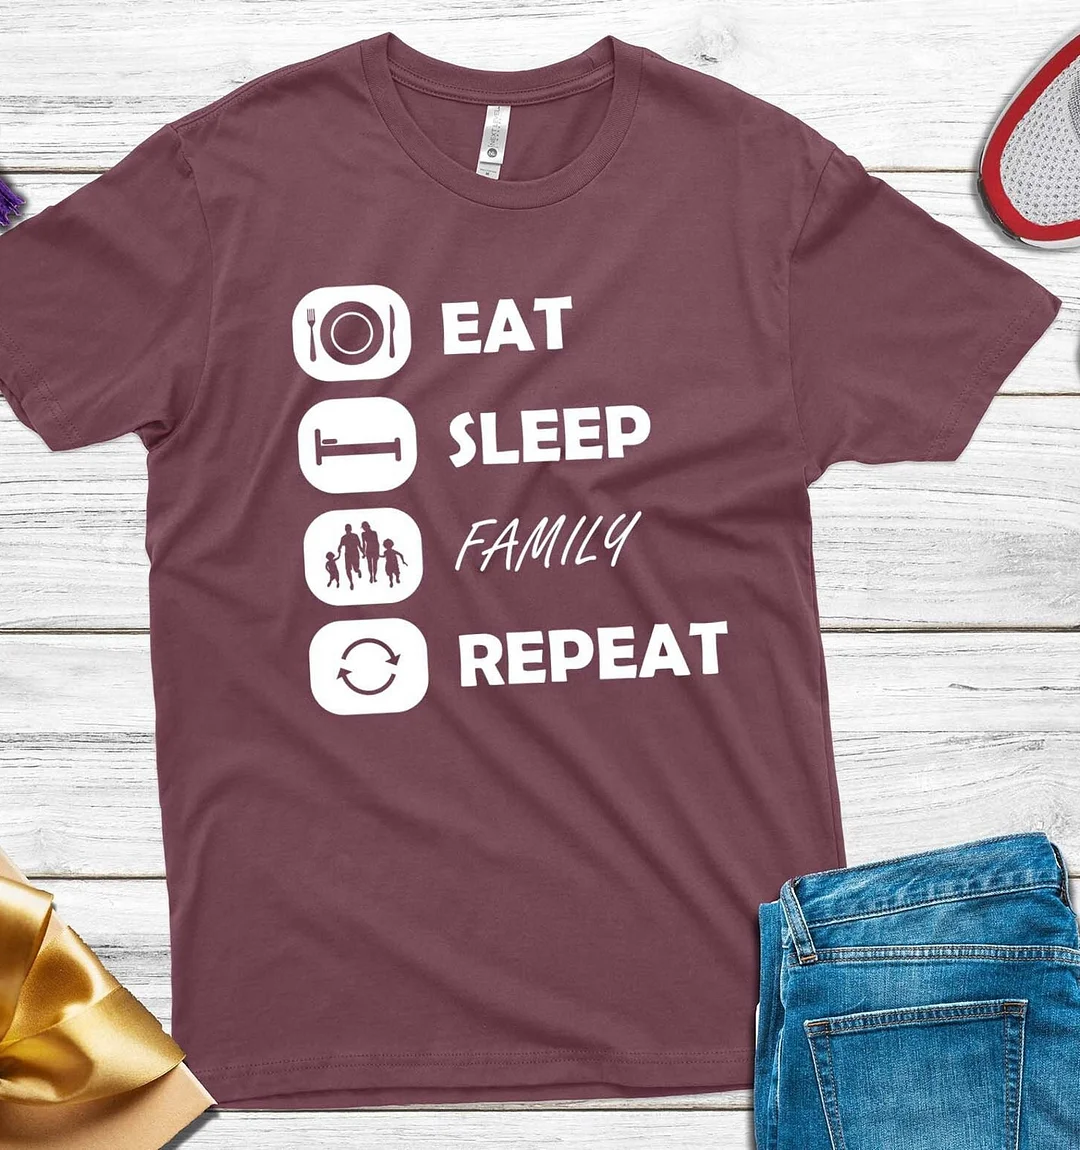 Women And Man Eat Sleep Family Repeat Shirt Is Everything Best Gift Shirts Mom Top Tees